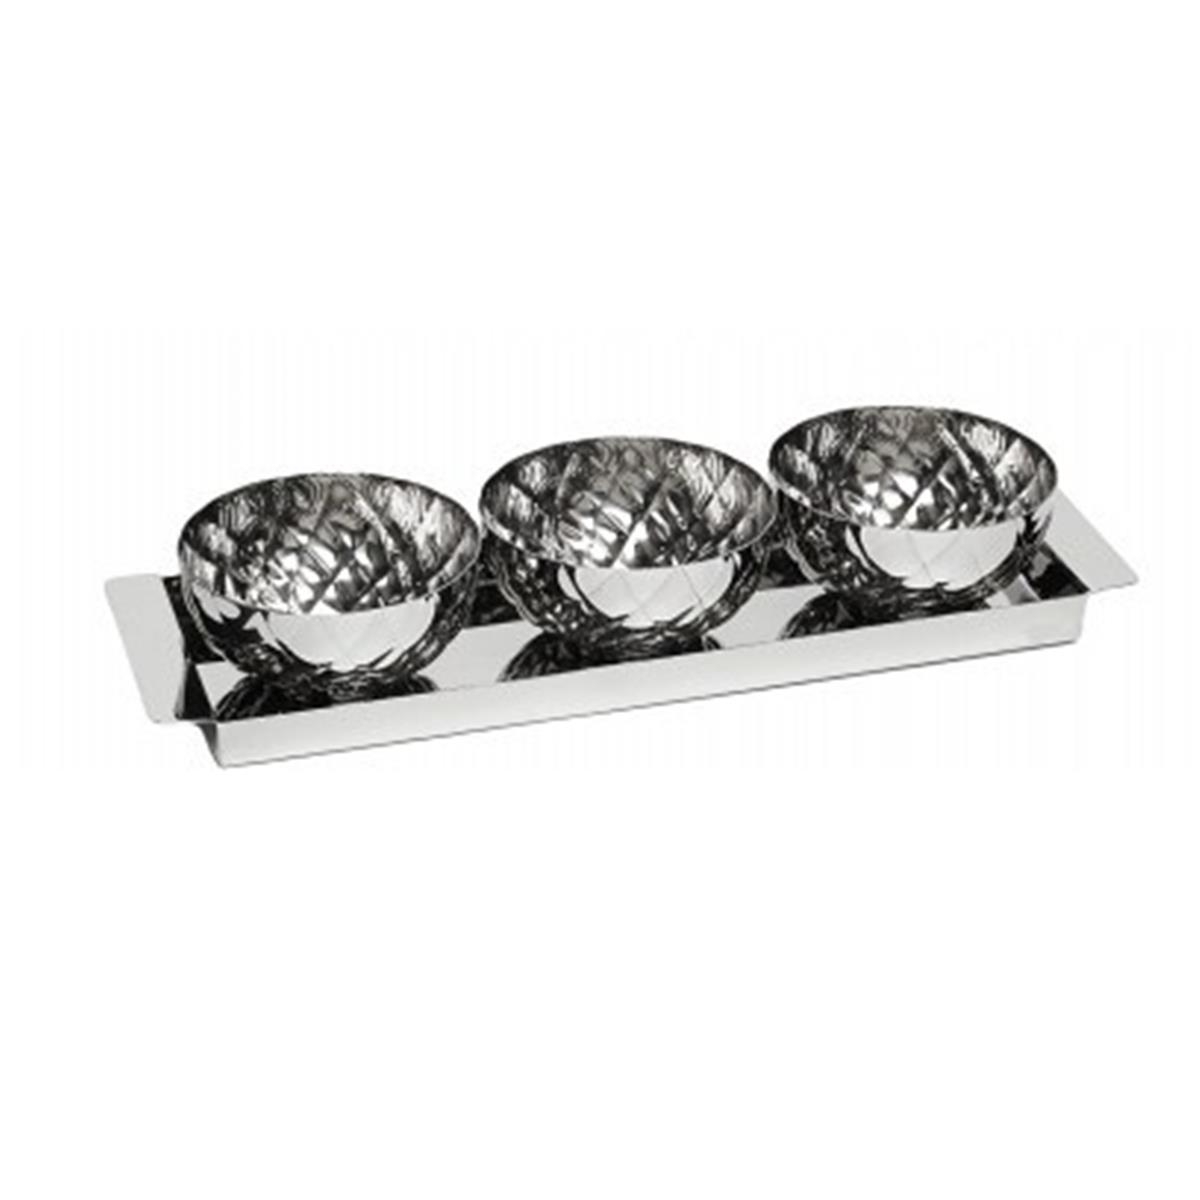 Classic Touch Spr889 Rectangular Tray With 3 Small Pineapple Design Bowls